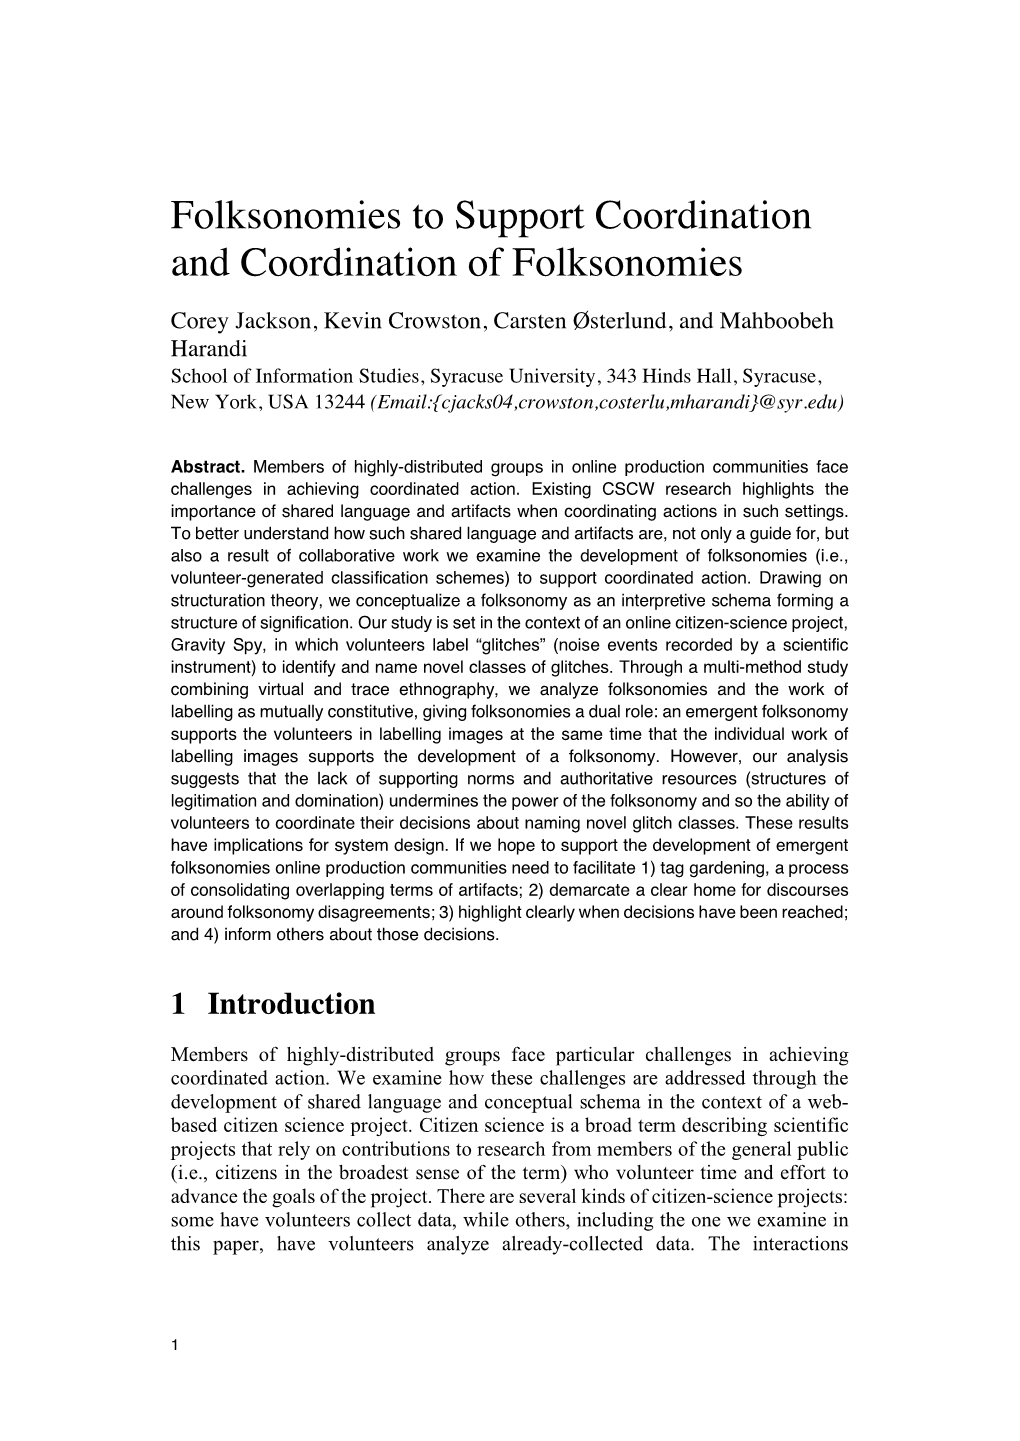 Folksonomies to Support Coordination and Coordination of Folksonomies